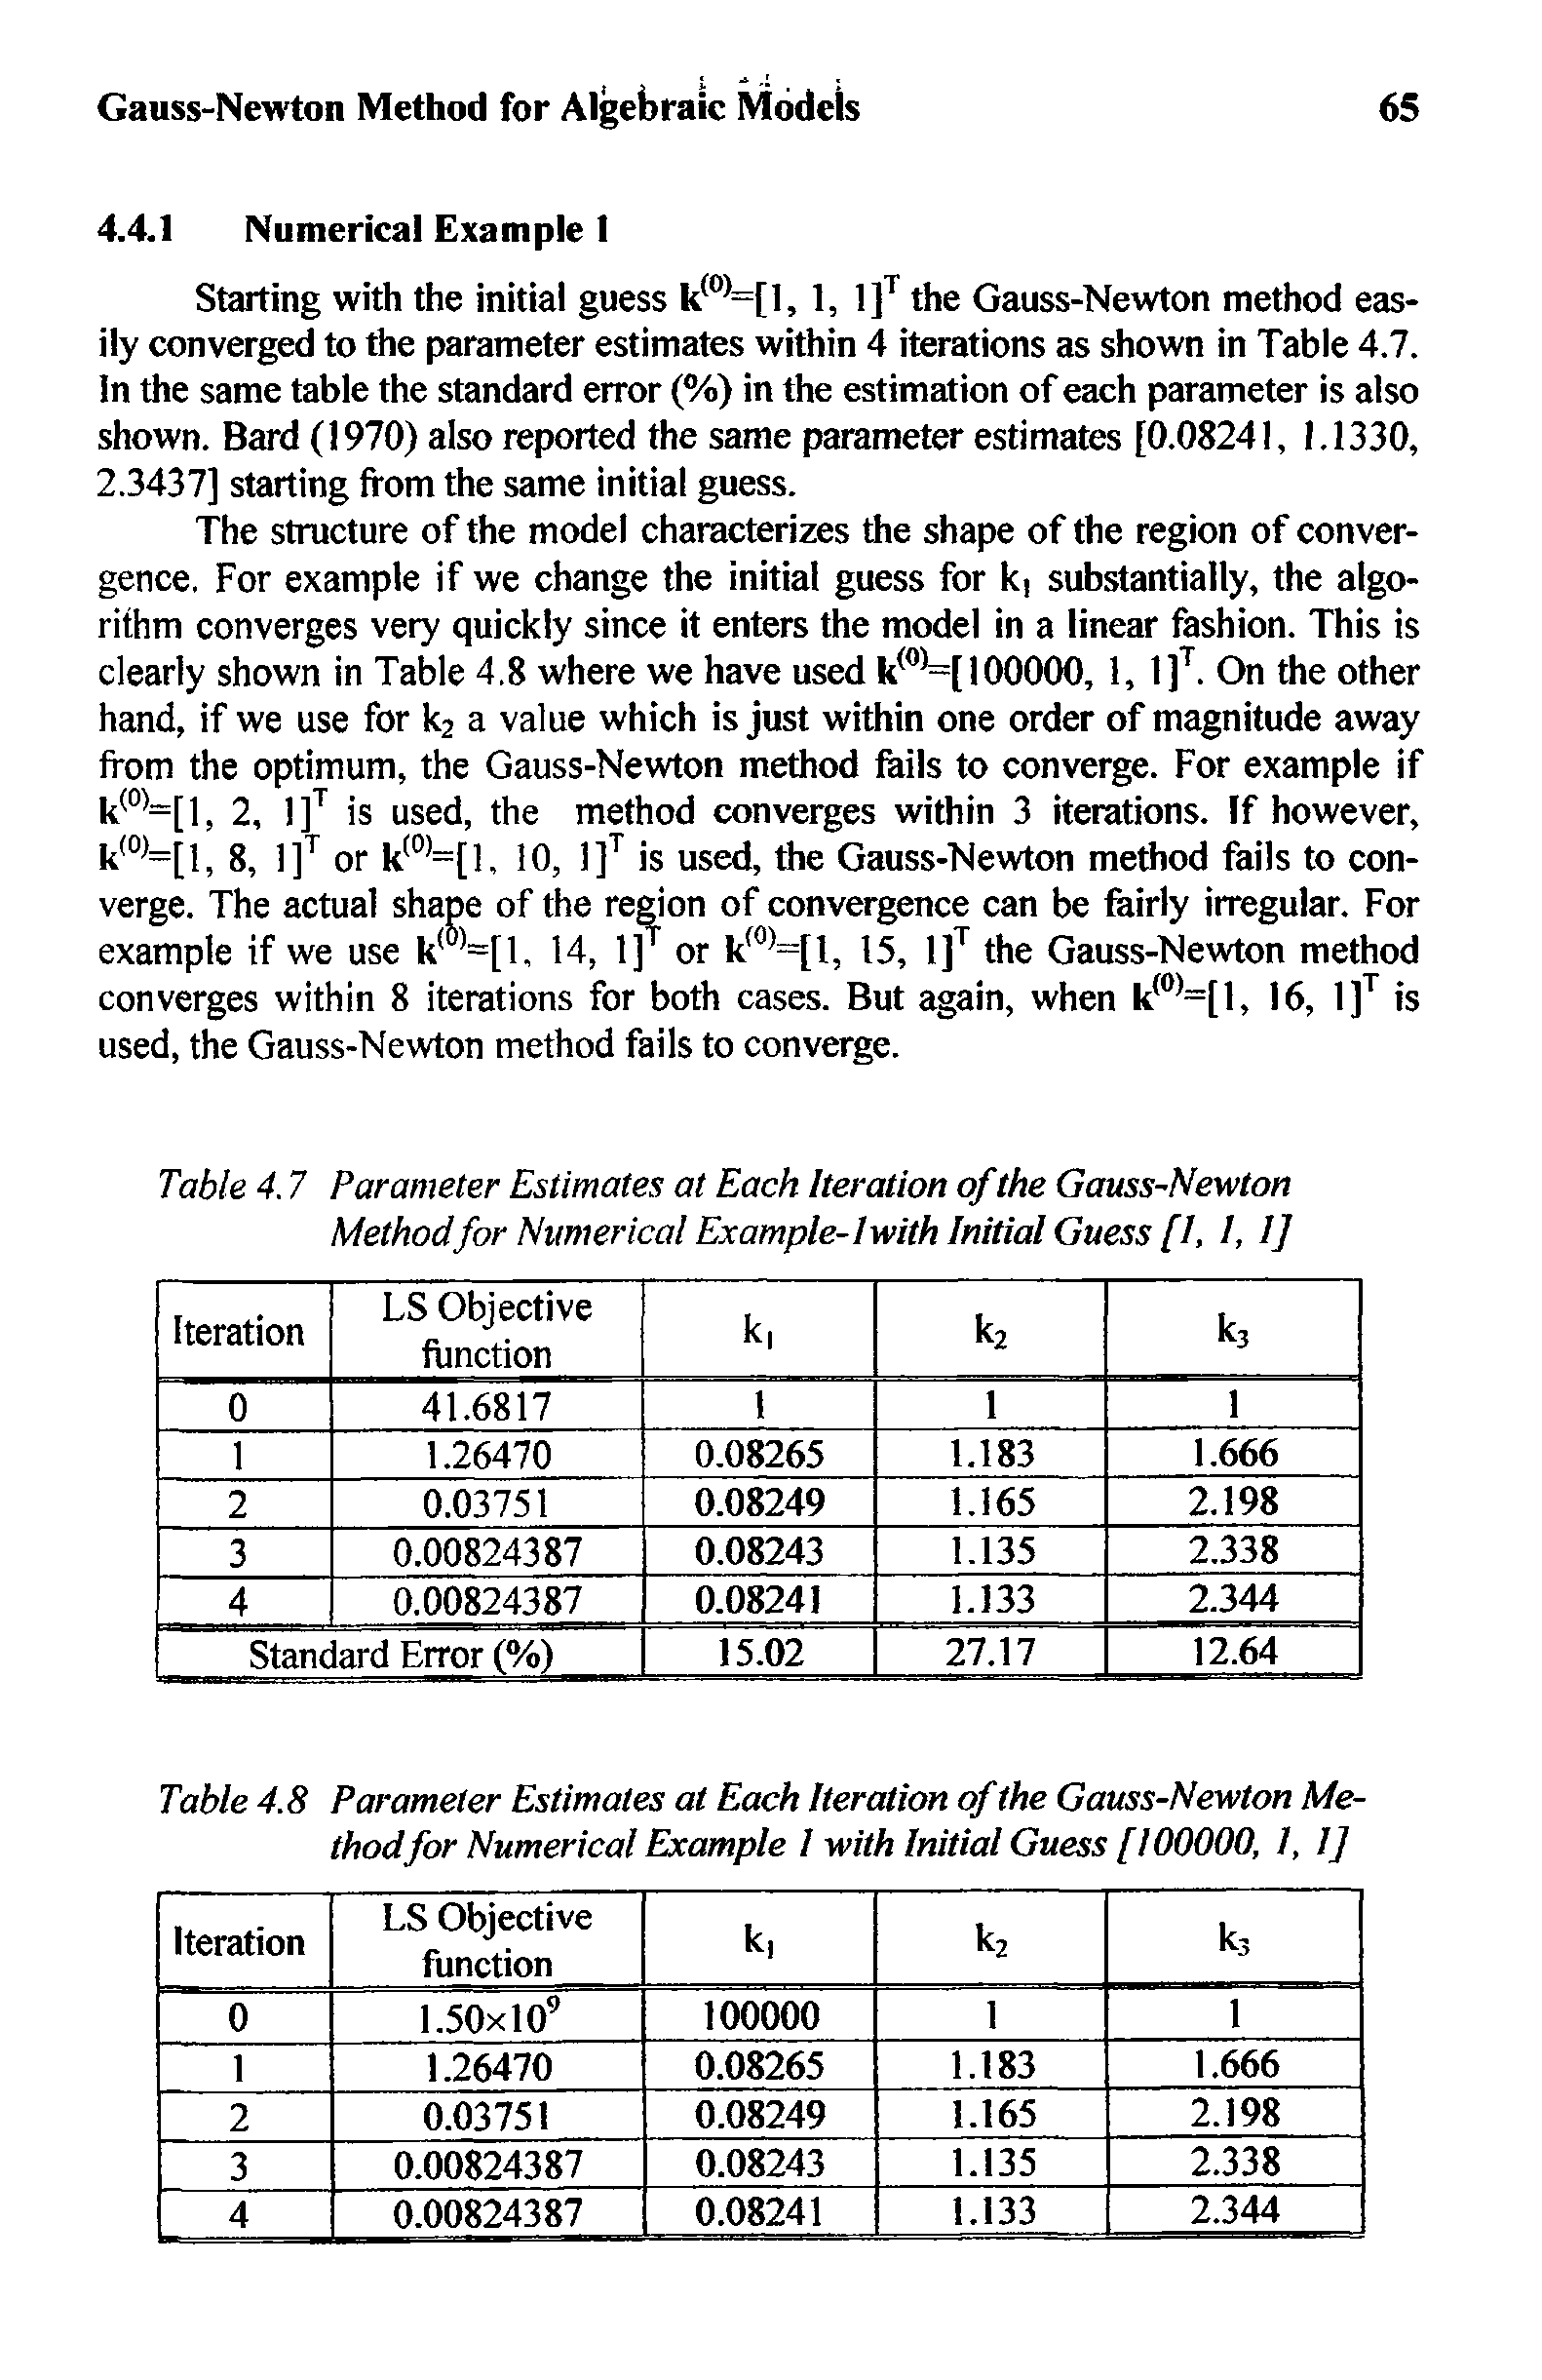 Table 4.7 Parameter Estimates at Each Iteration of the Gauss-Newton Methodfor Numerical Example-Iwith Initial Guess [1, I, 1]...